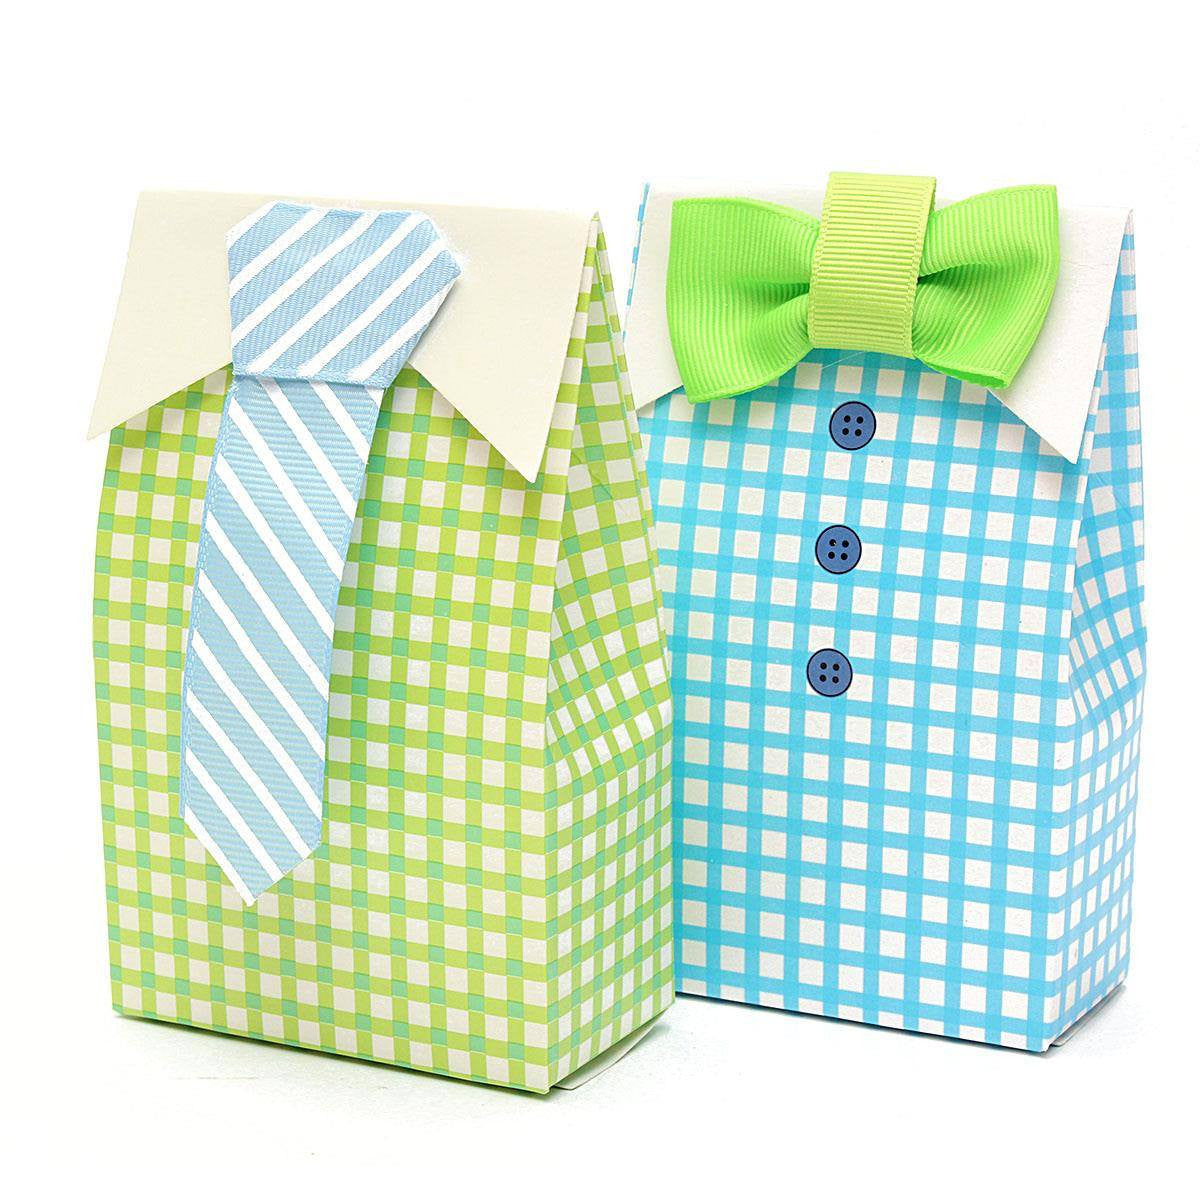 Baby Shower Shirt with Bow-tie & Shirt with Tie Favor Boxes (12 pieces) - Americasfavors